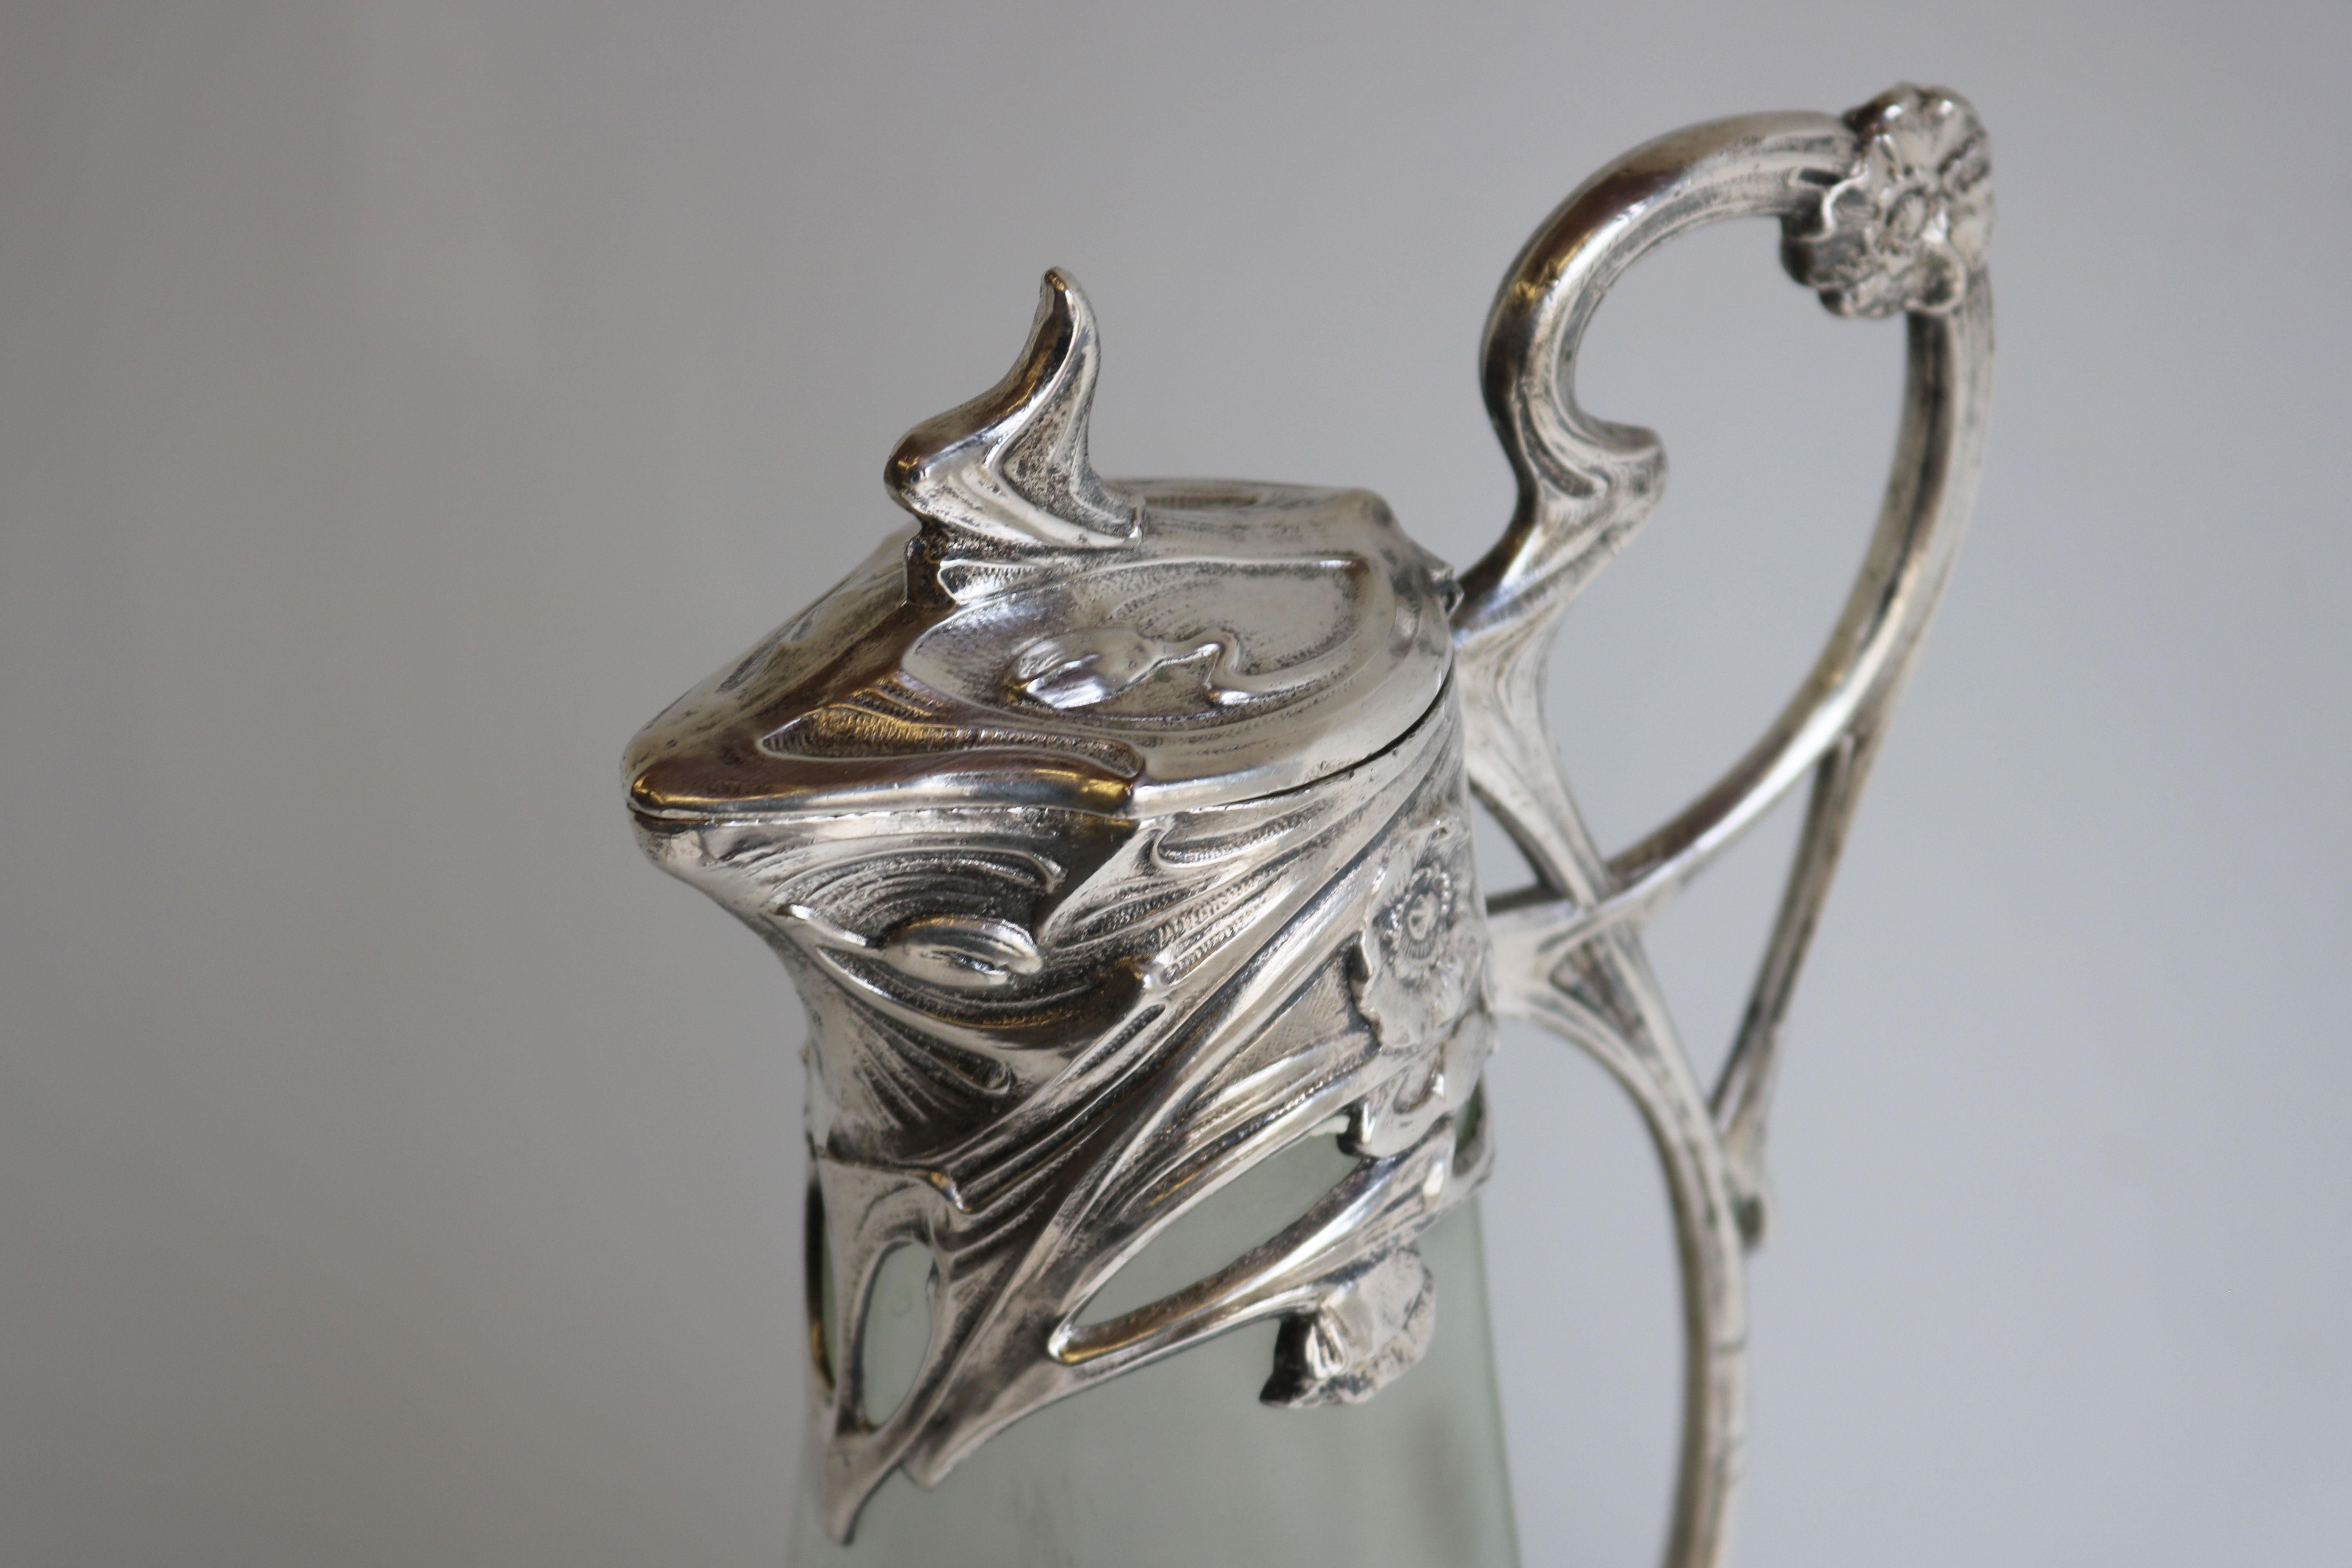 Early 20th Century Exquisite French Art Nouveau Decanter / Pitcher by J. Barian Silver Glass 1900 For Sale